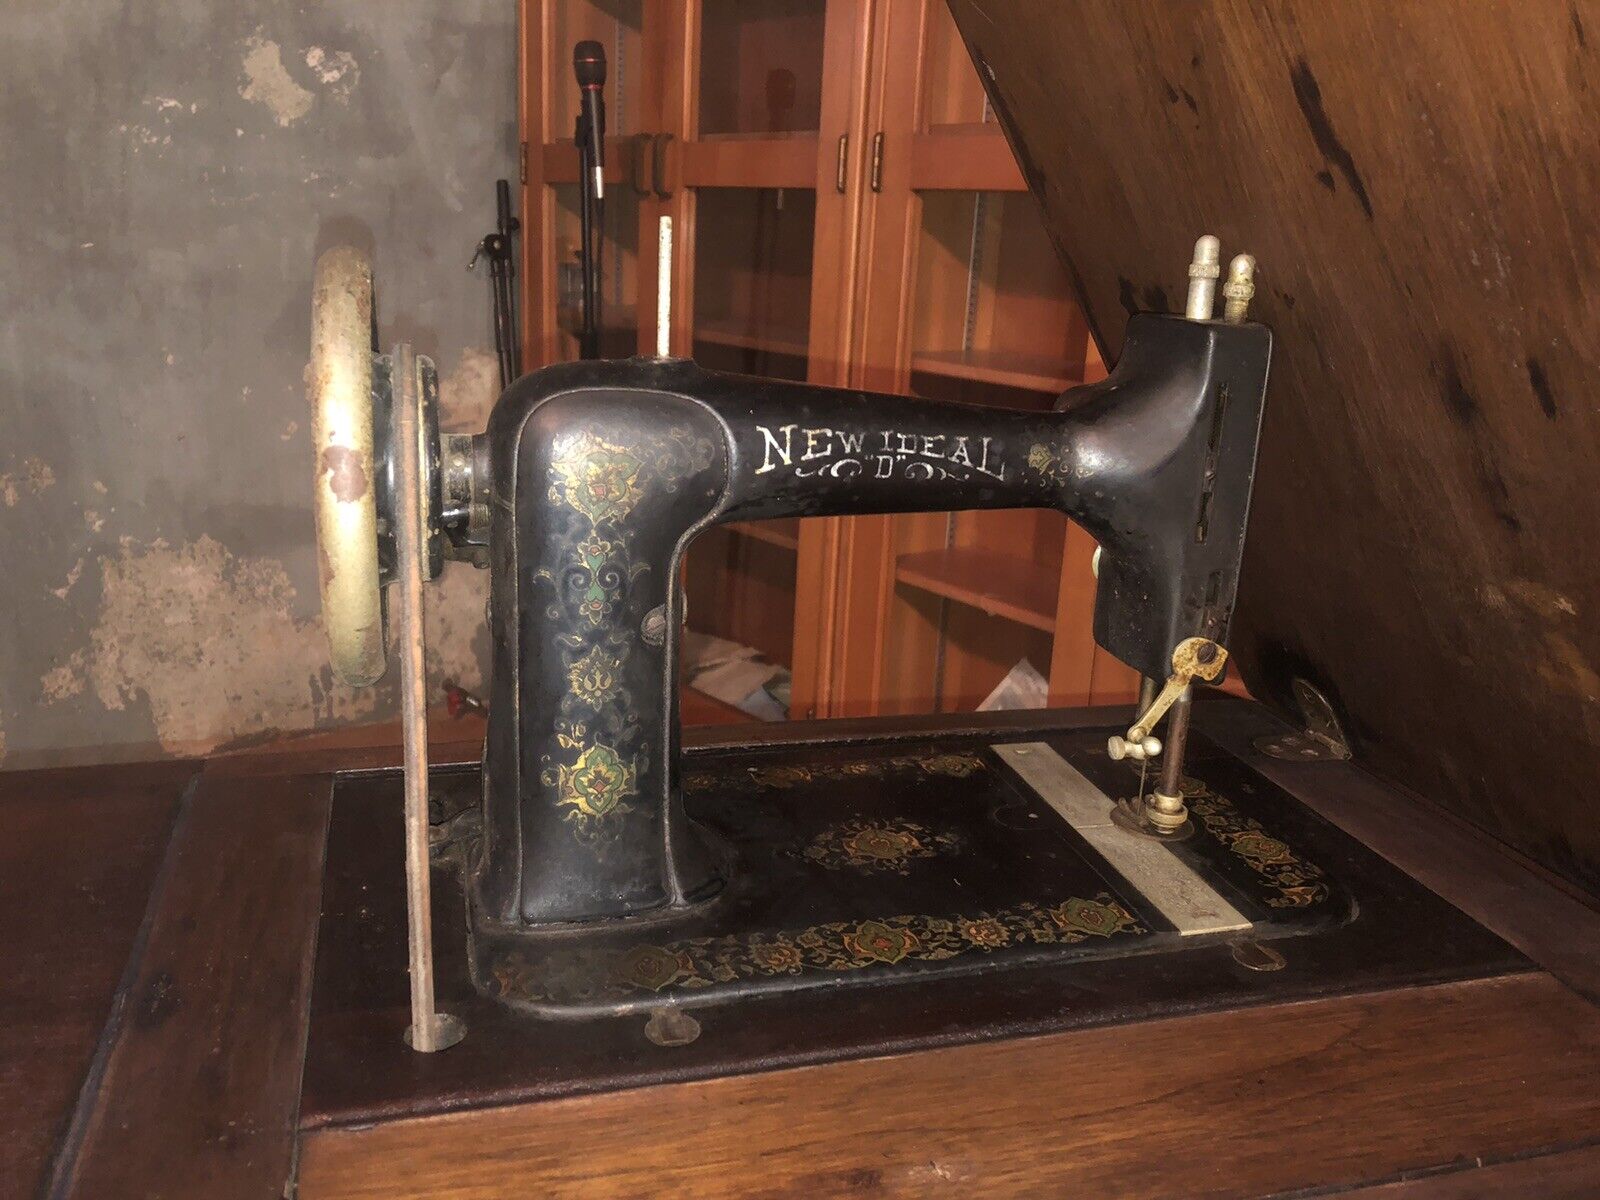 Vintage New Ideal “D” Antique Sewing Machine by The New Home Sewing Machine Co.